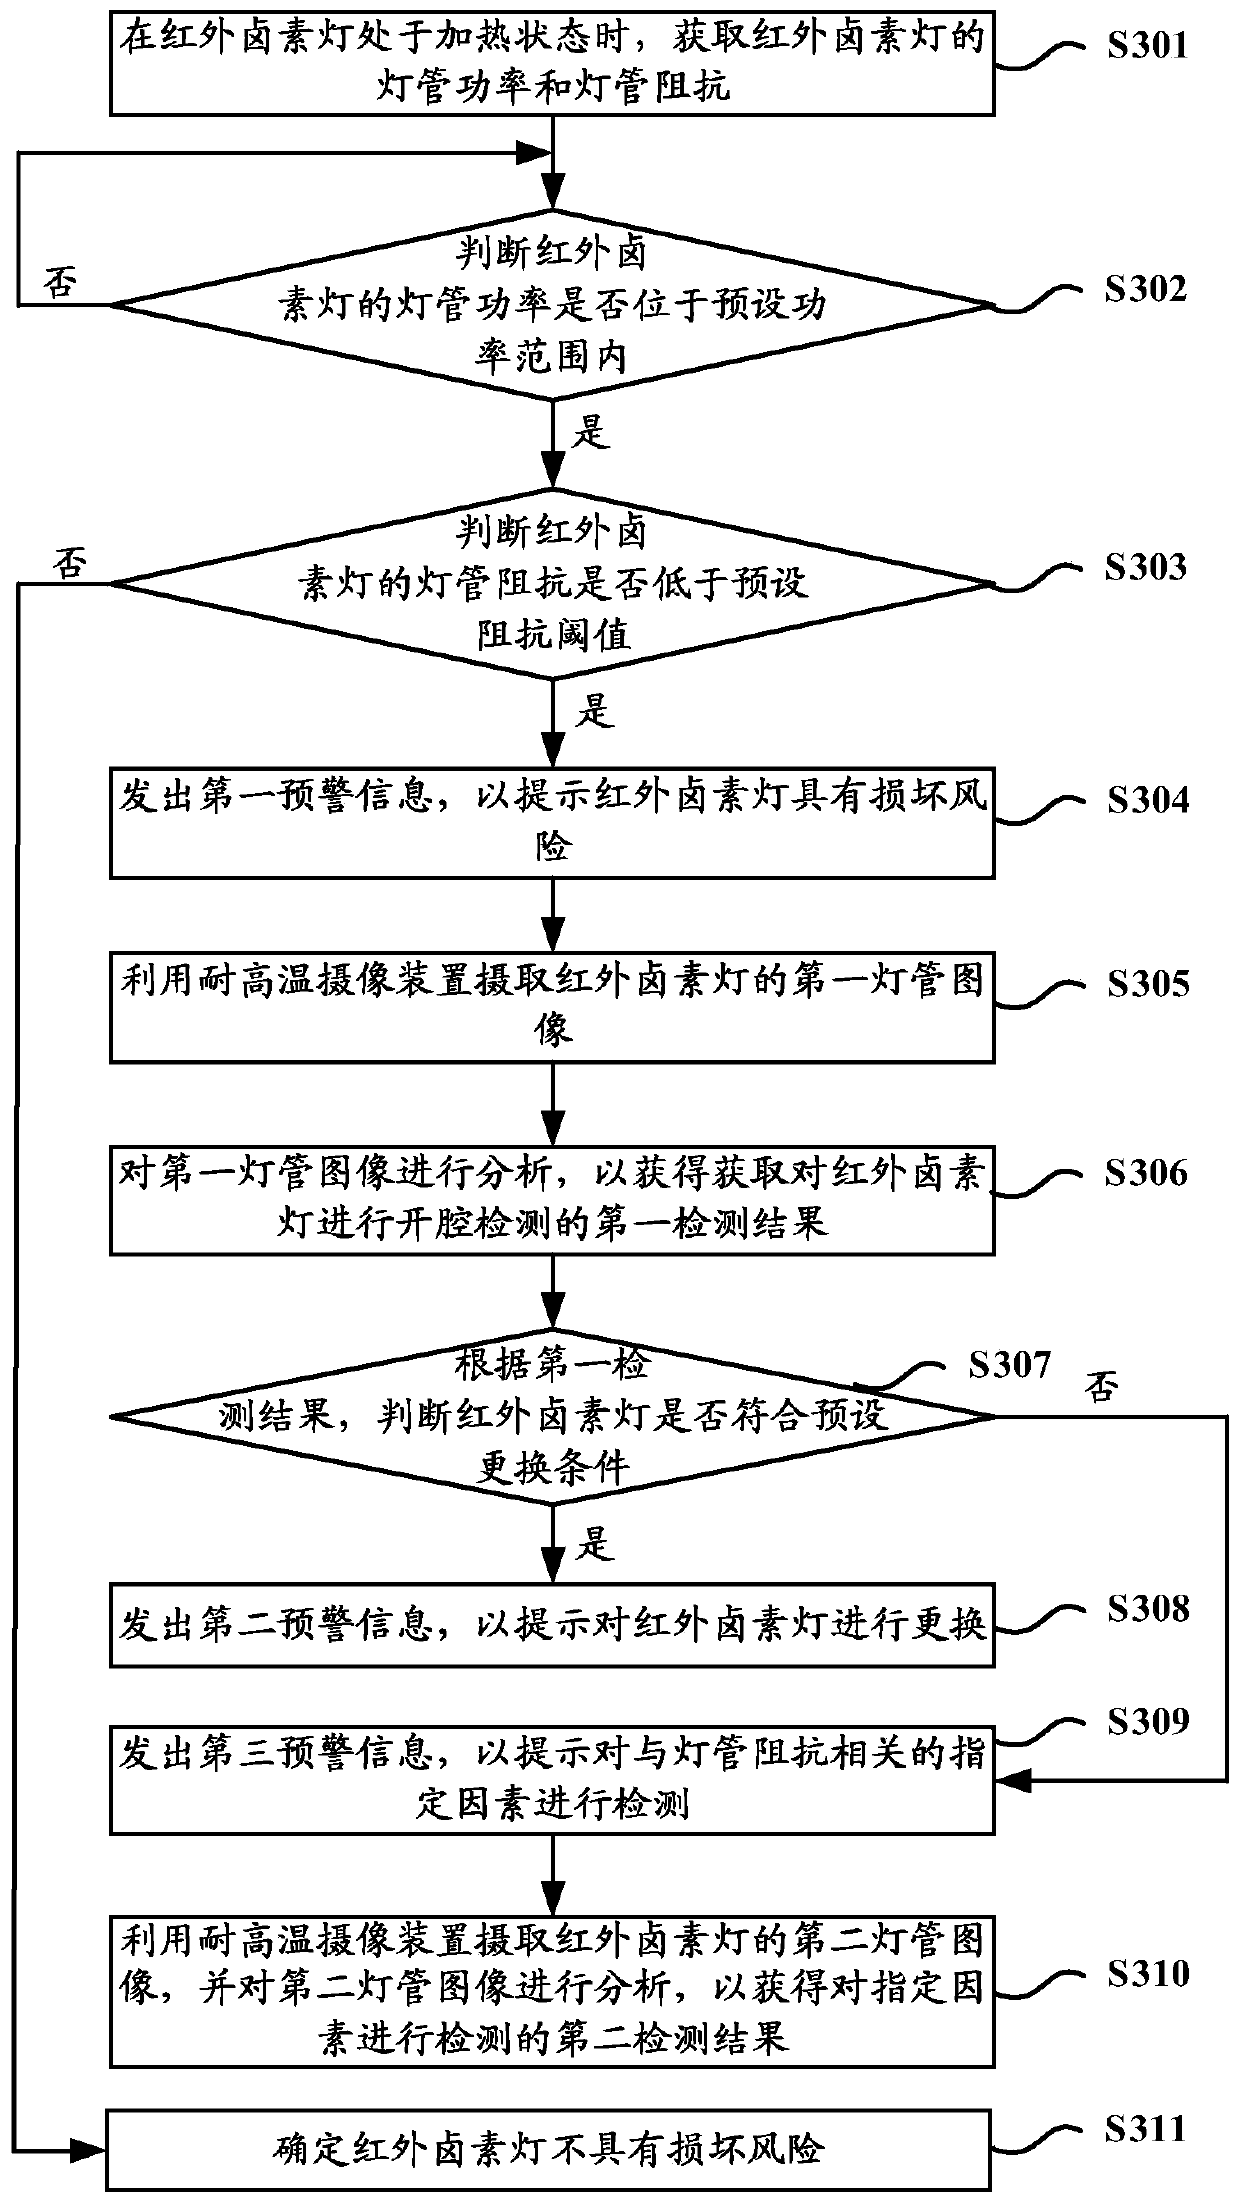 Detection method, device and equipment for halogen lamp